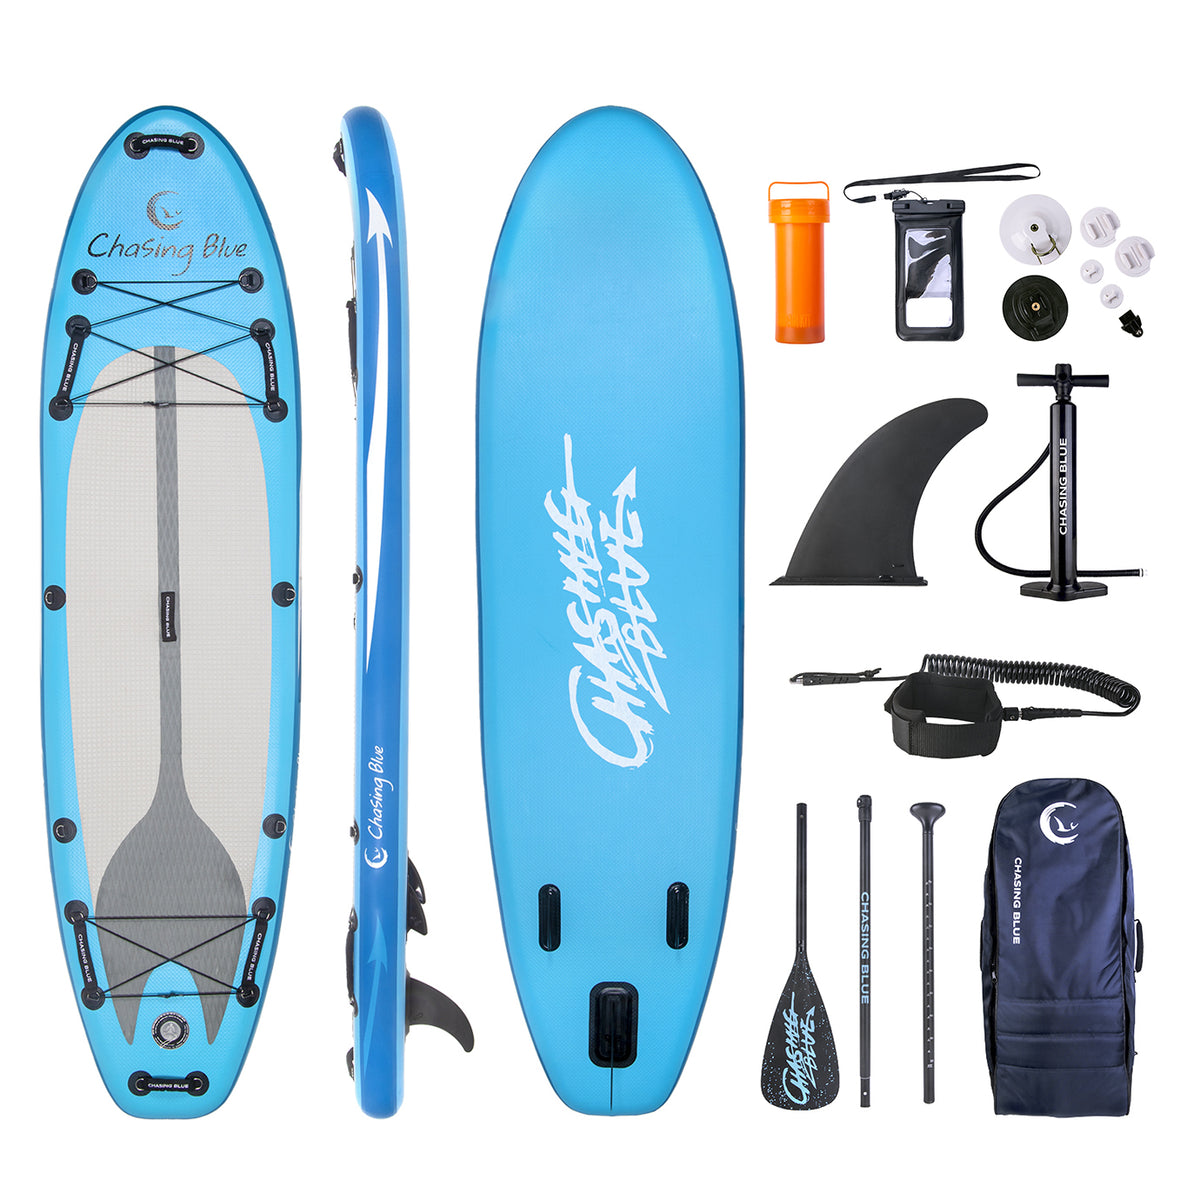 Chasing Blue SUP Board